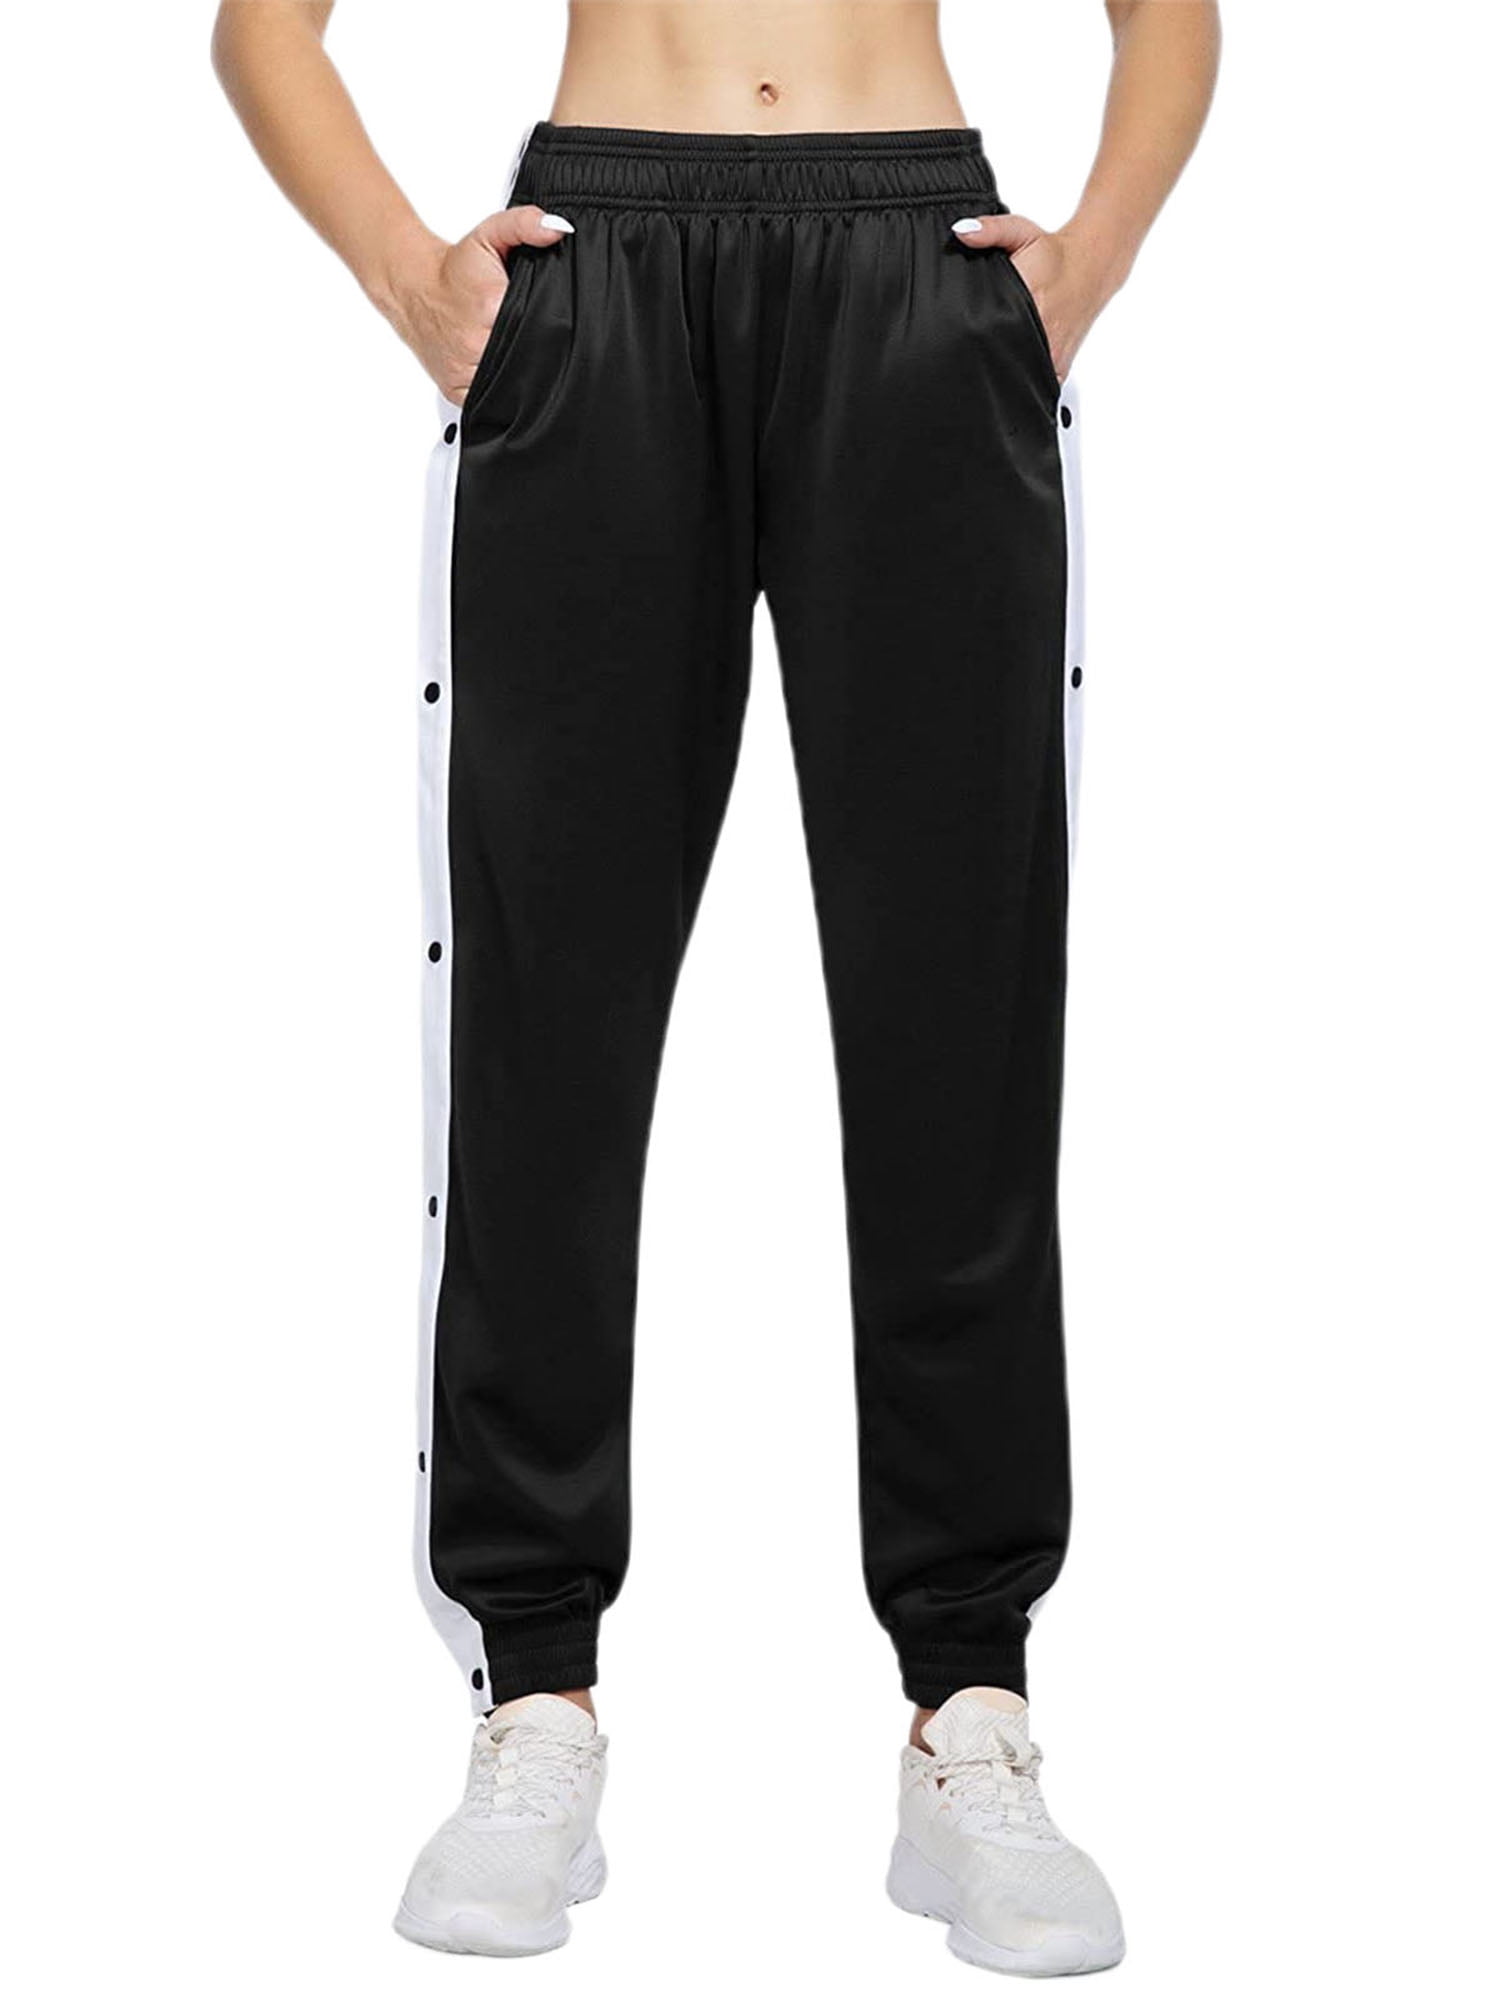 Aayomet Joggers For Women Women's Joggers Pants Lightweight Quick Dry Workout  Track Pants for Women with Zipper Pockets,Black M - Walmart.com